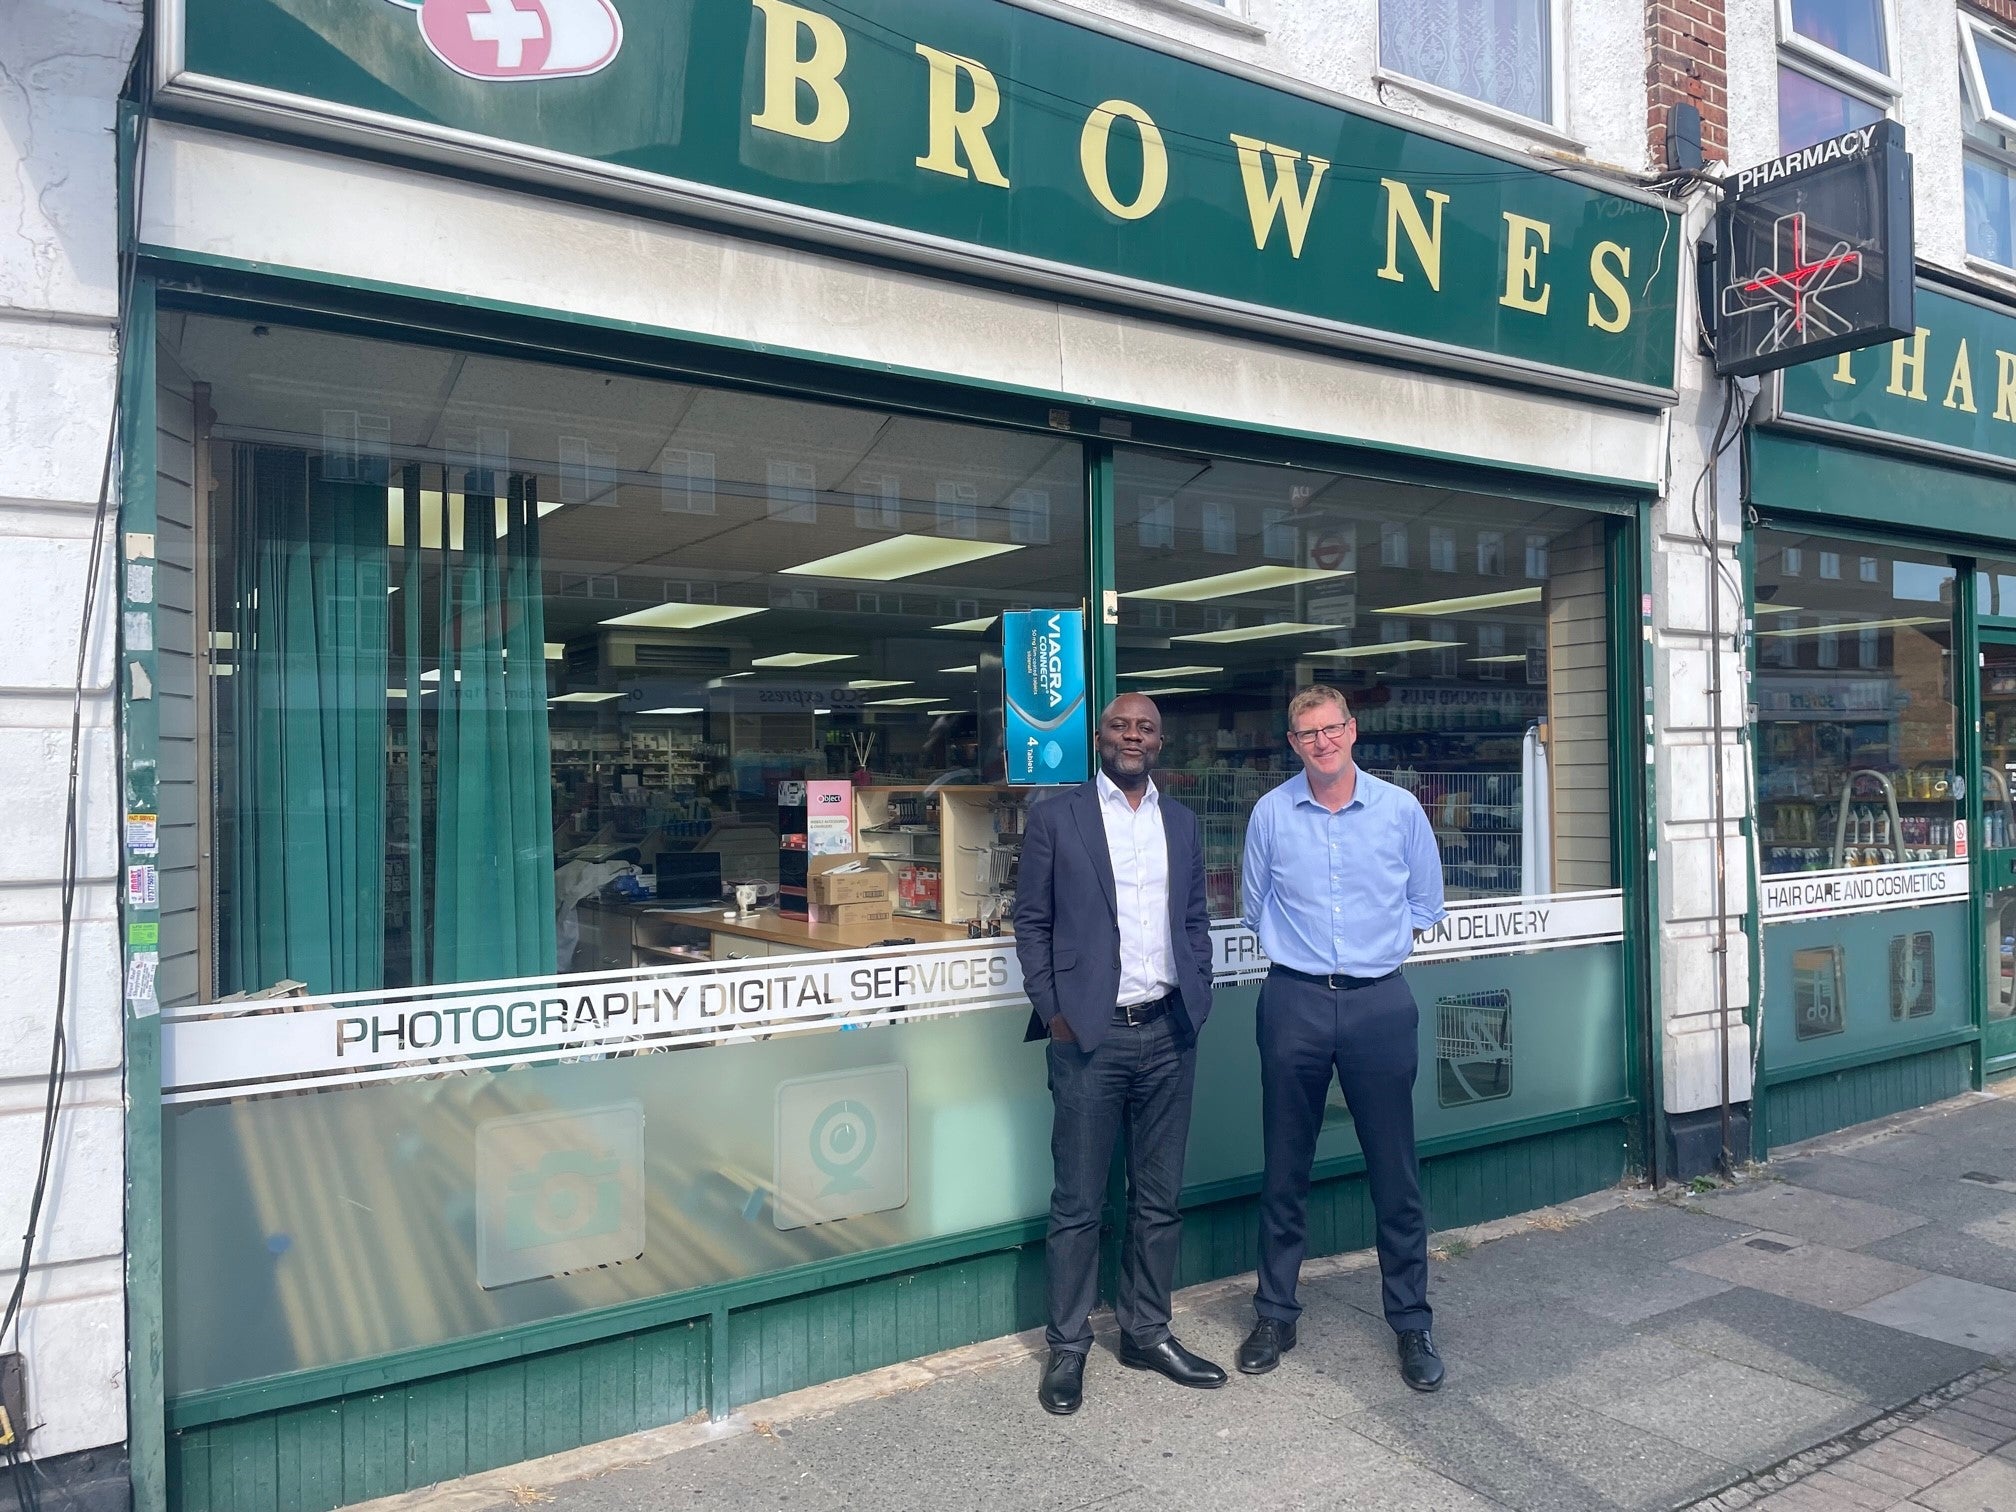 A F Browne Pharmacy in Sidcup, South East London